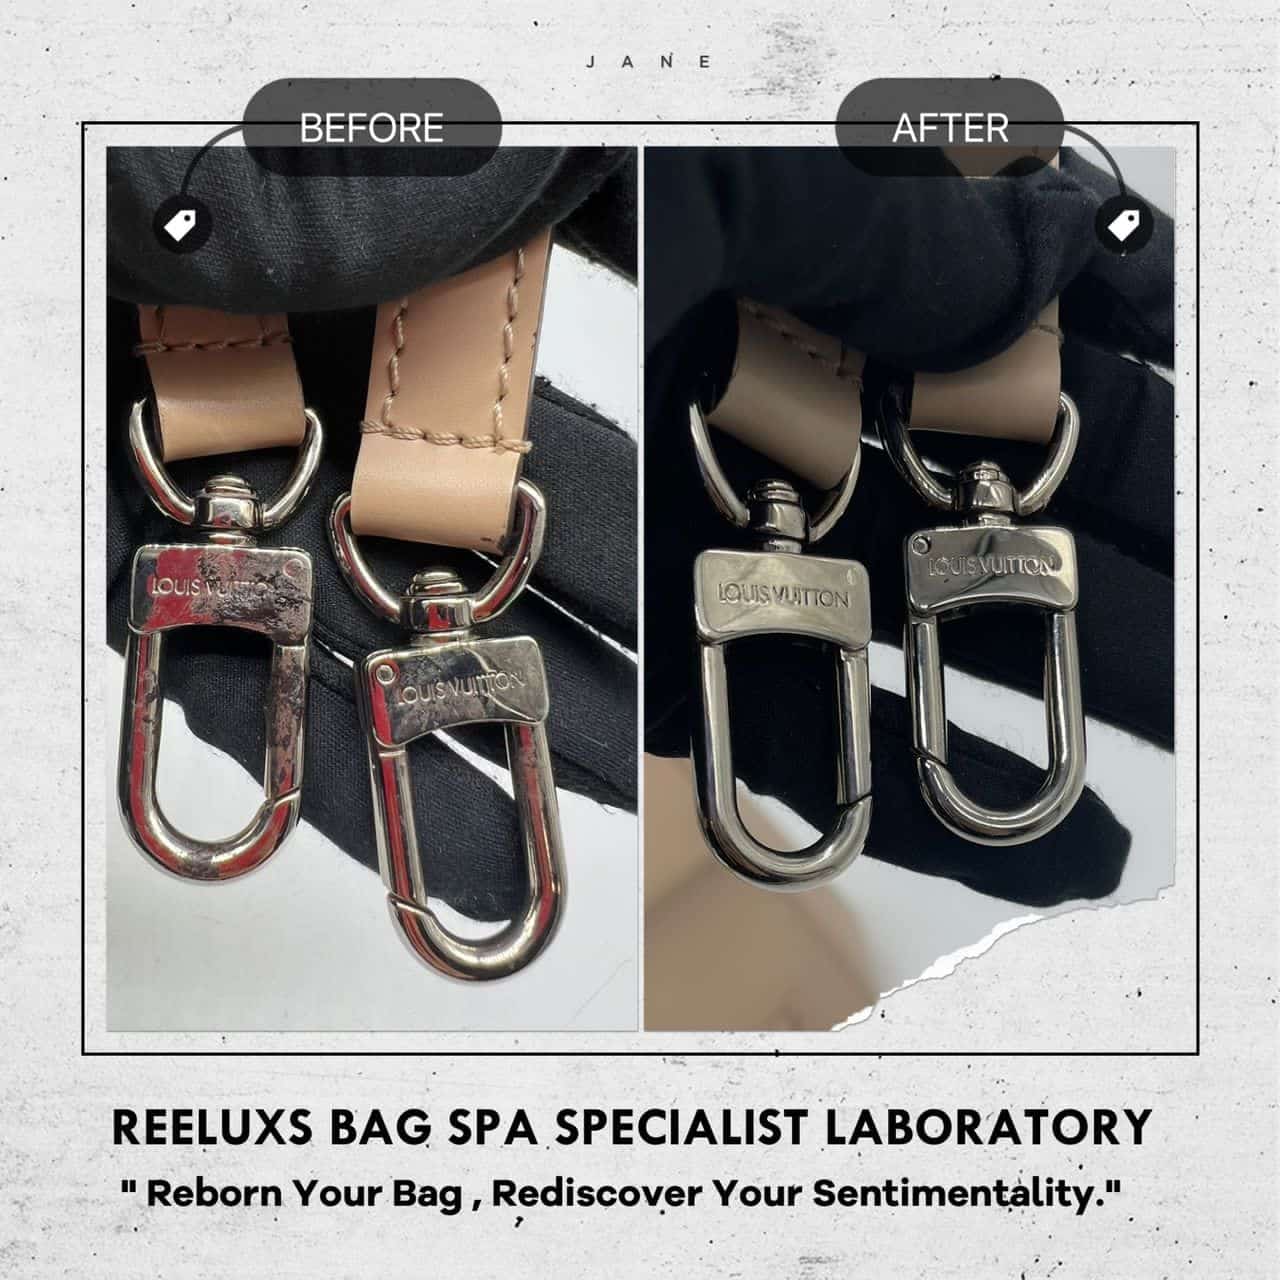 LOUIS VUITTON Epi Leather Oil Edge Melted Damaged Fully Refurbishment -  Reeluxs Bag Spa Specialist Singapore